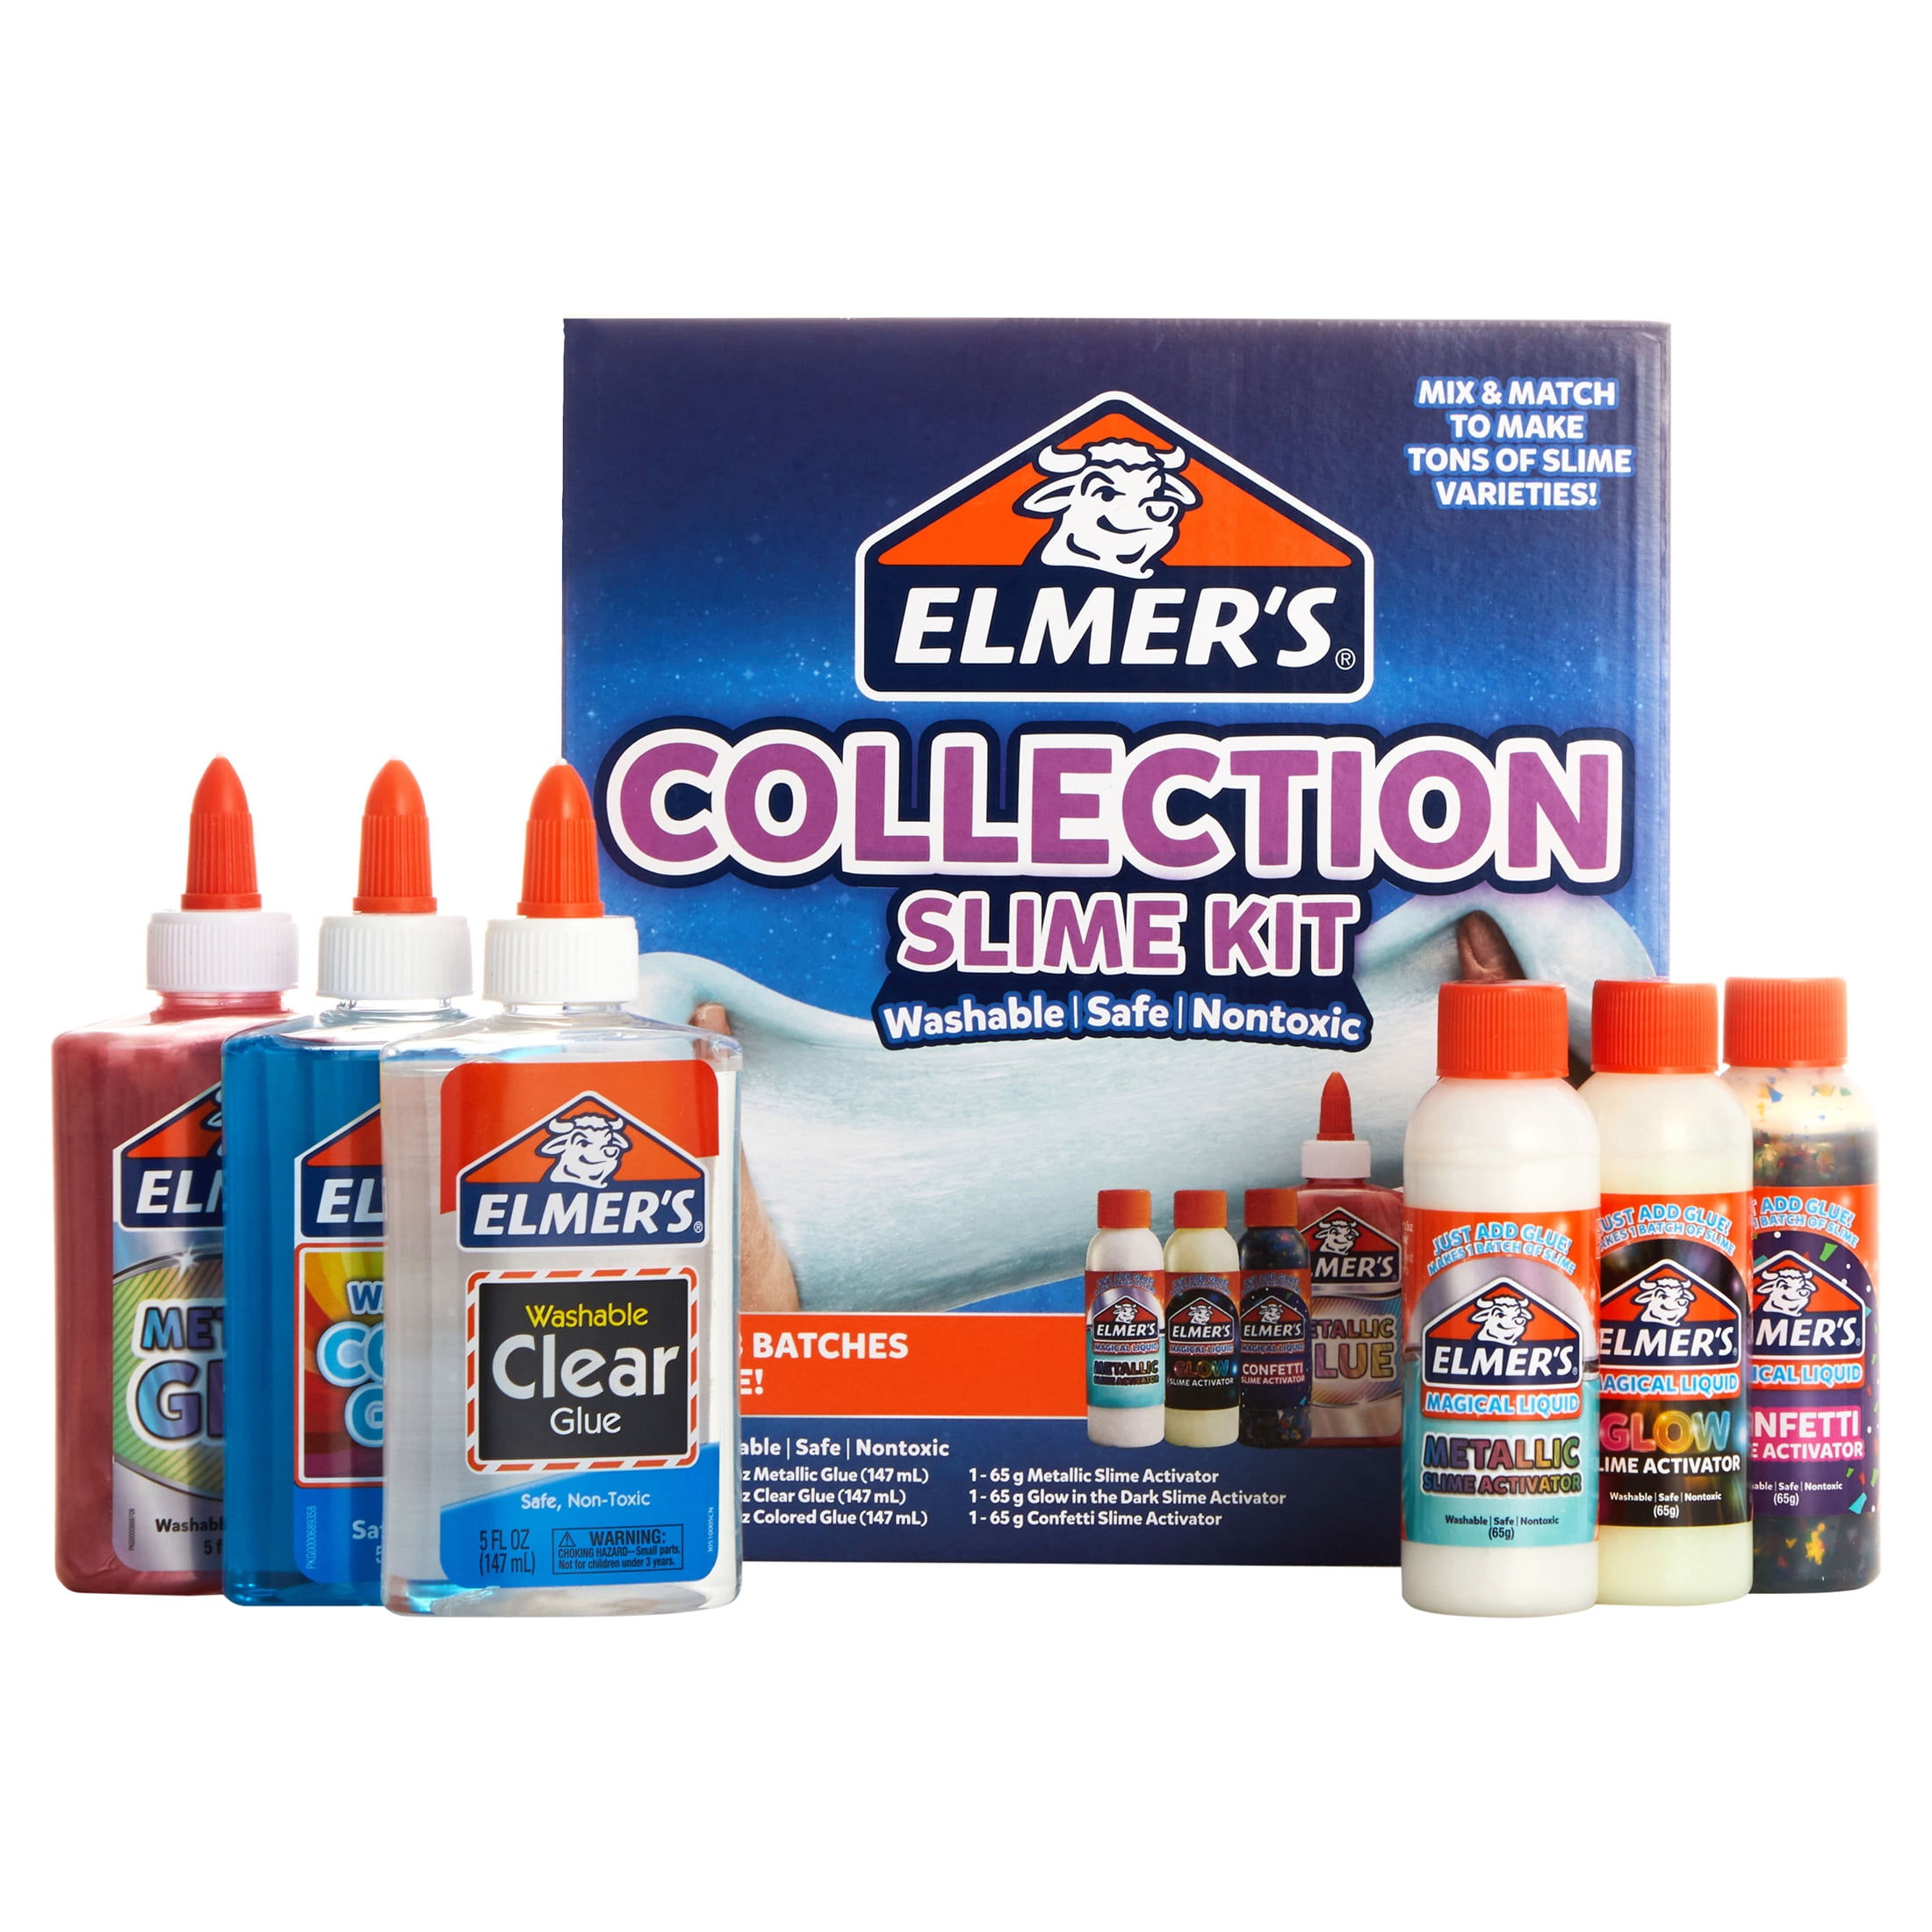 Elmer's Collection Slime Kit: Translucent & Metallic Glue, Glow in